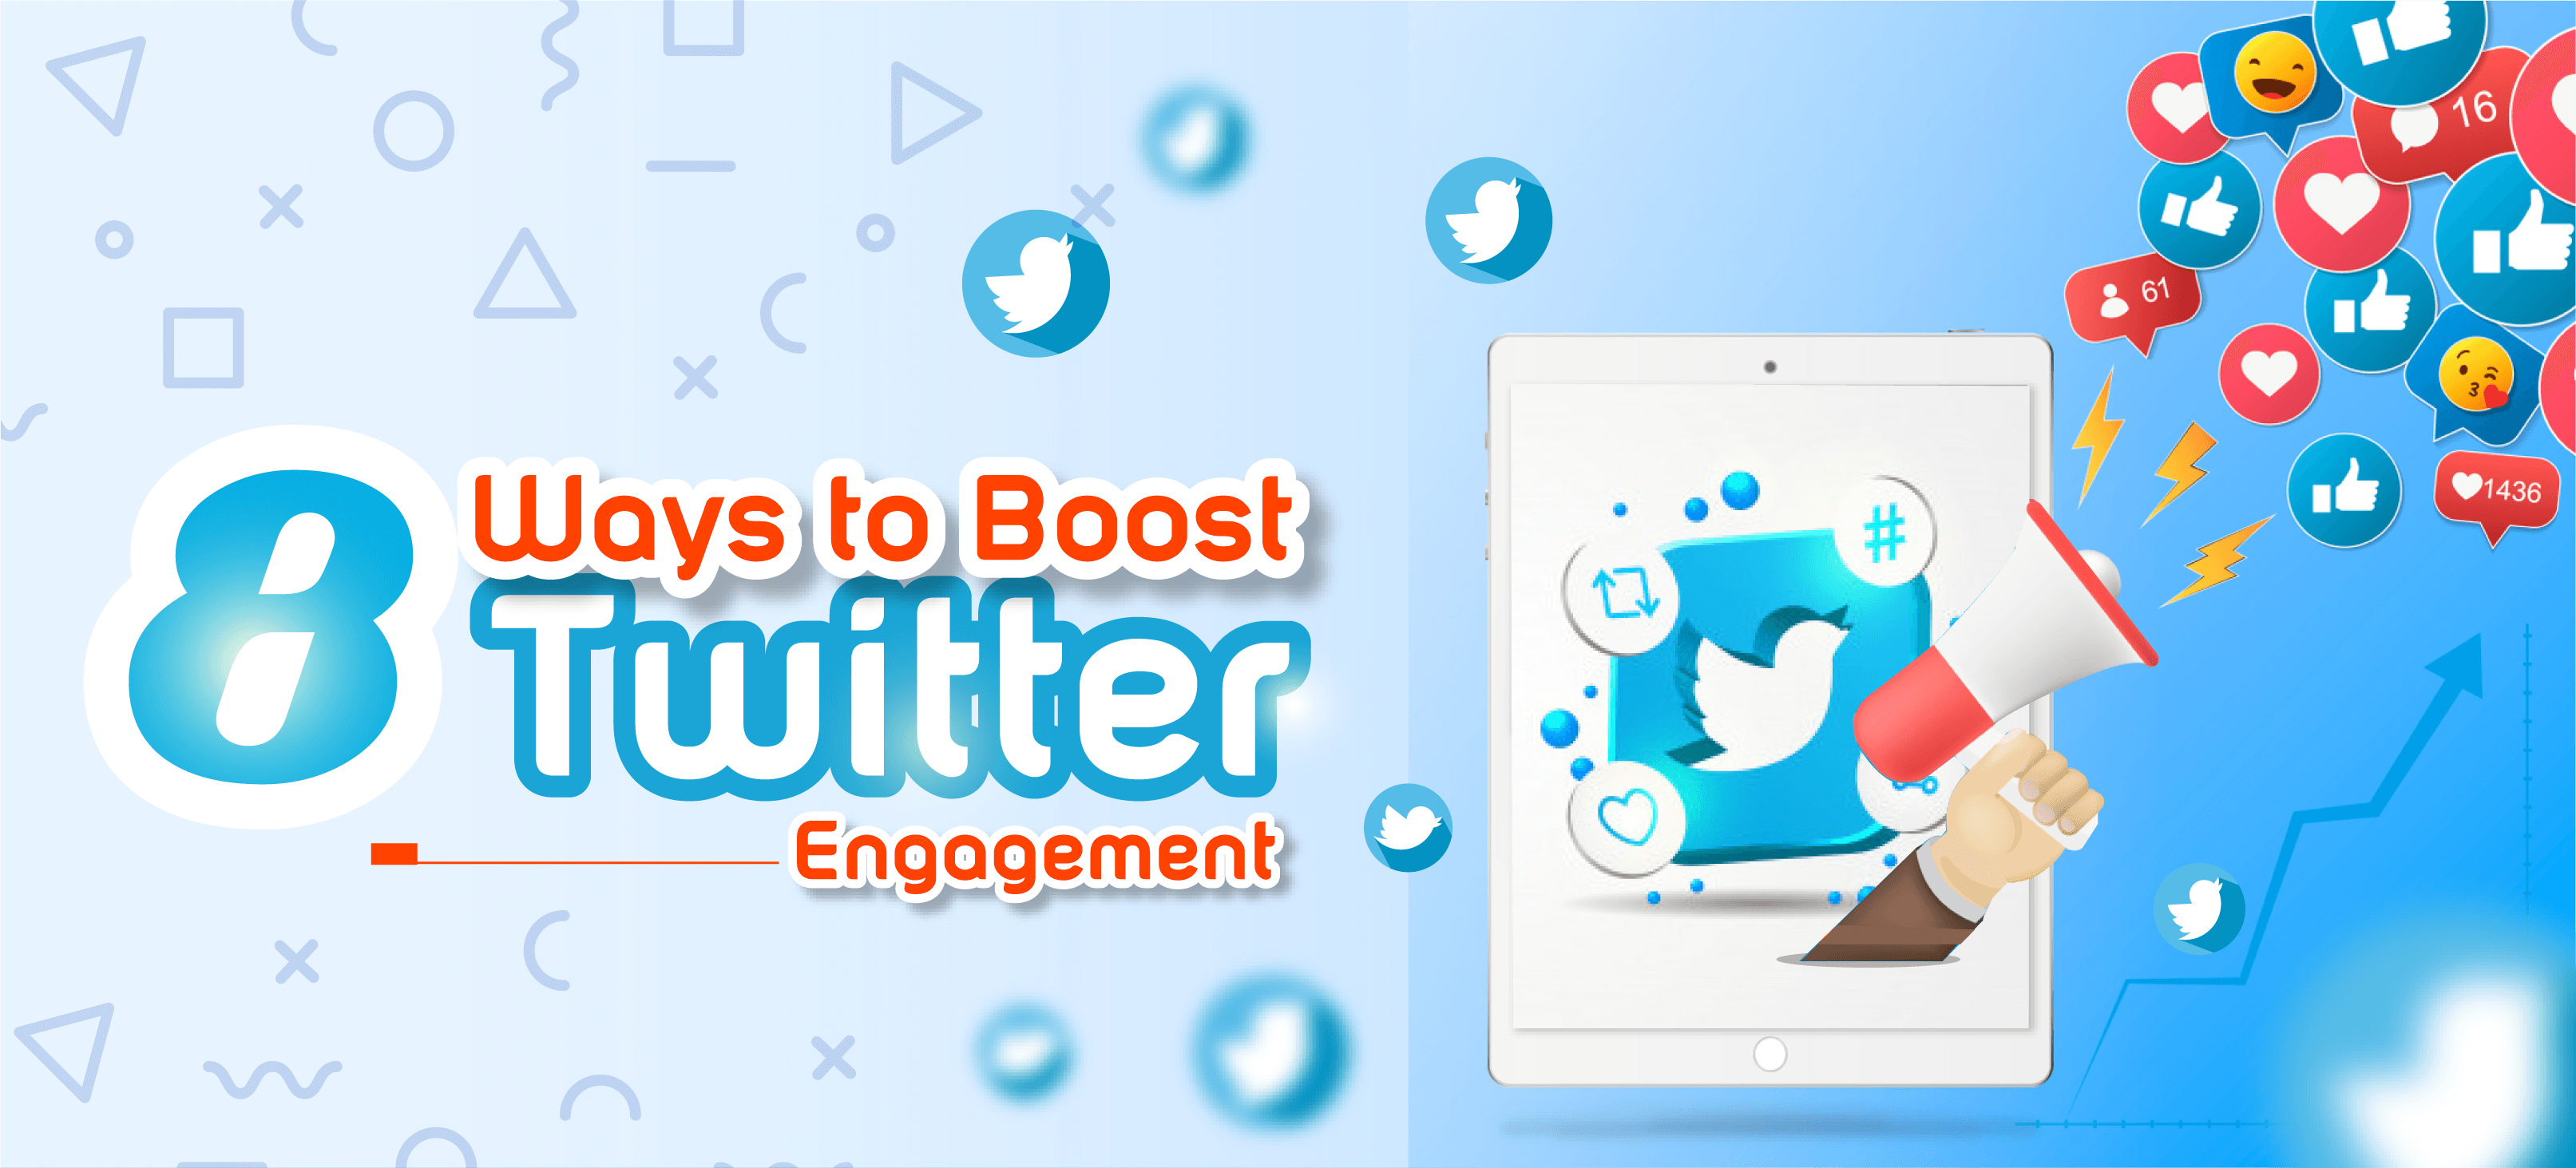 8 Simple Tactics to Increase Engagement on Twitter